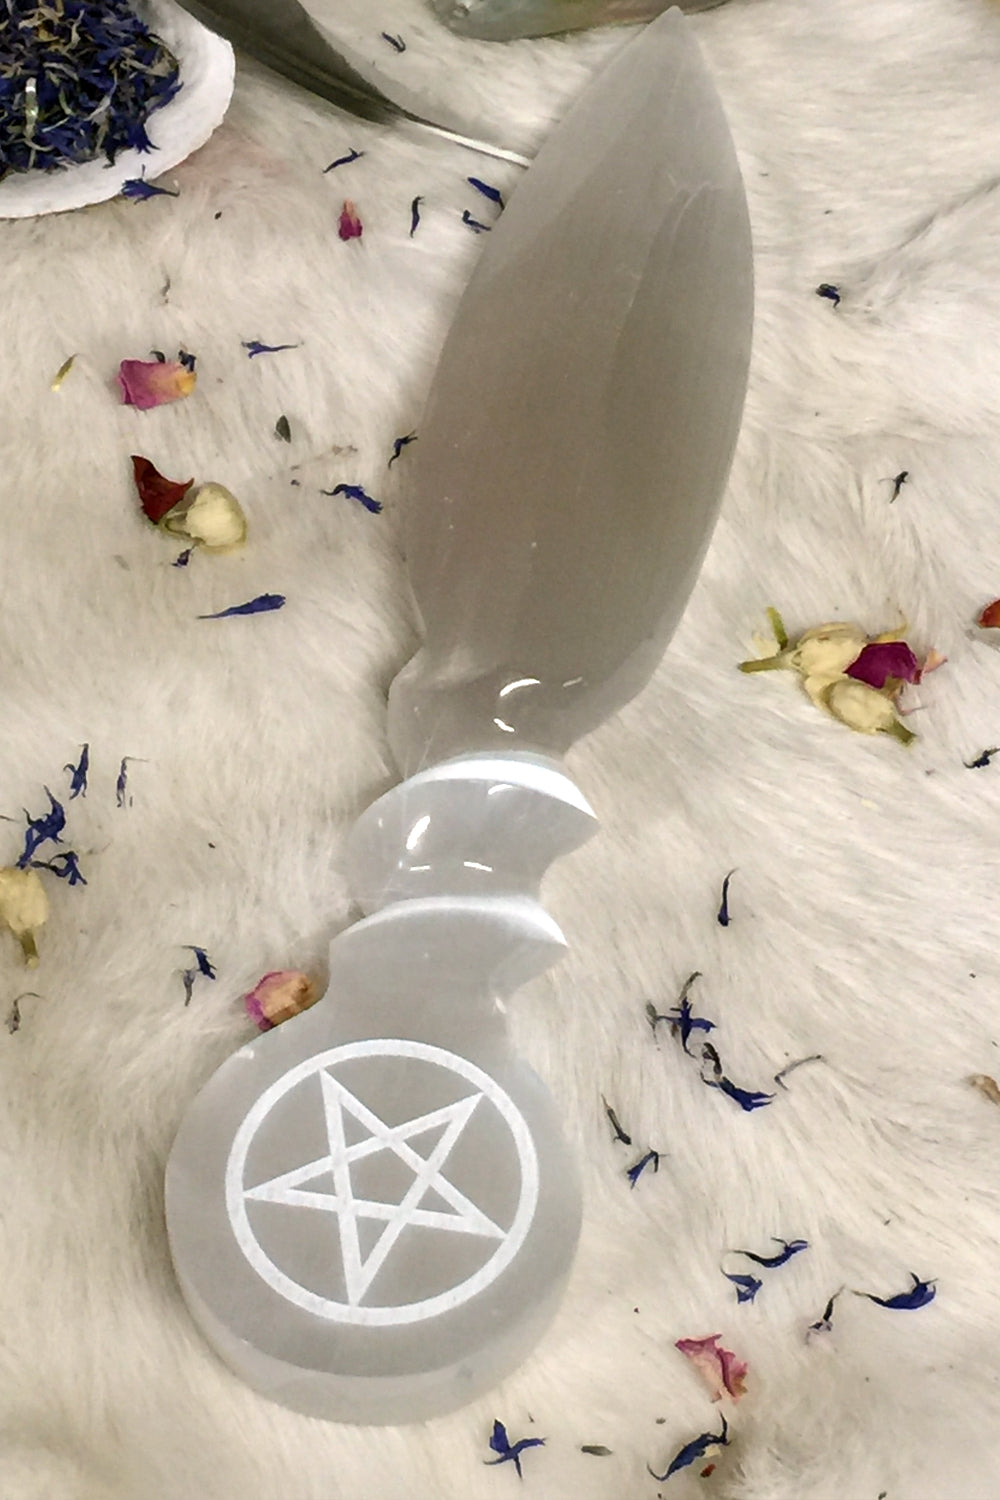 Large Selenite Athame with Pentacle Hilt | Twisted Selenite Wand |Selenite Pentacle Athame Ritual Knife for Directing Energy, Clear Negativity, Cleansing, Spells, Focus, Altar Tool, Meditation